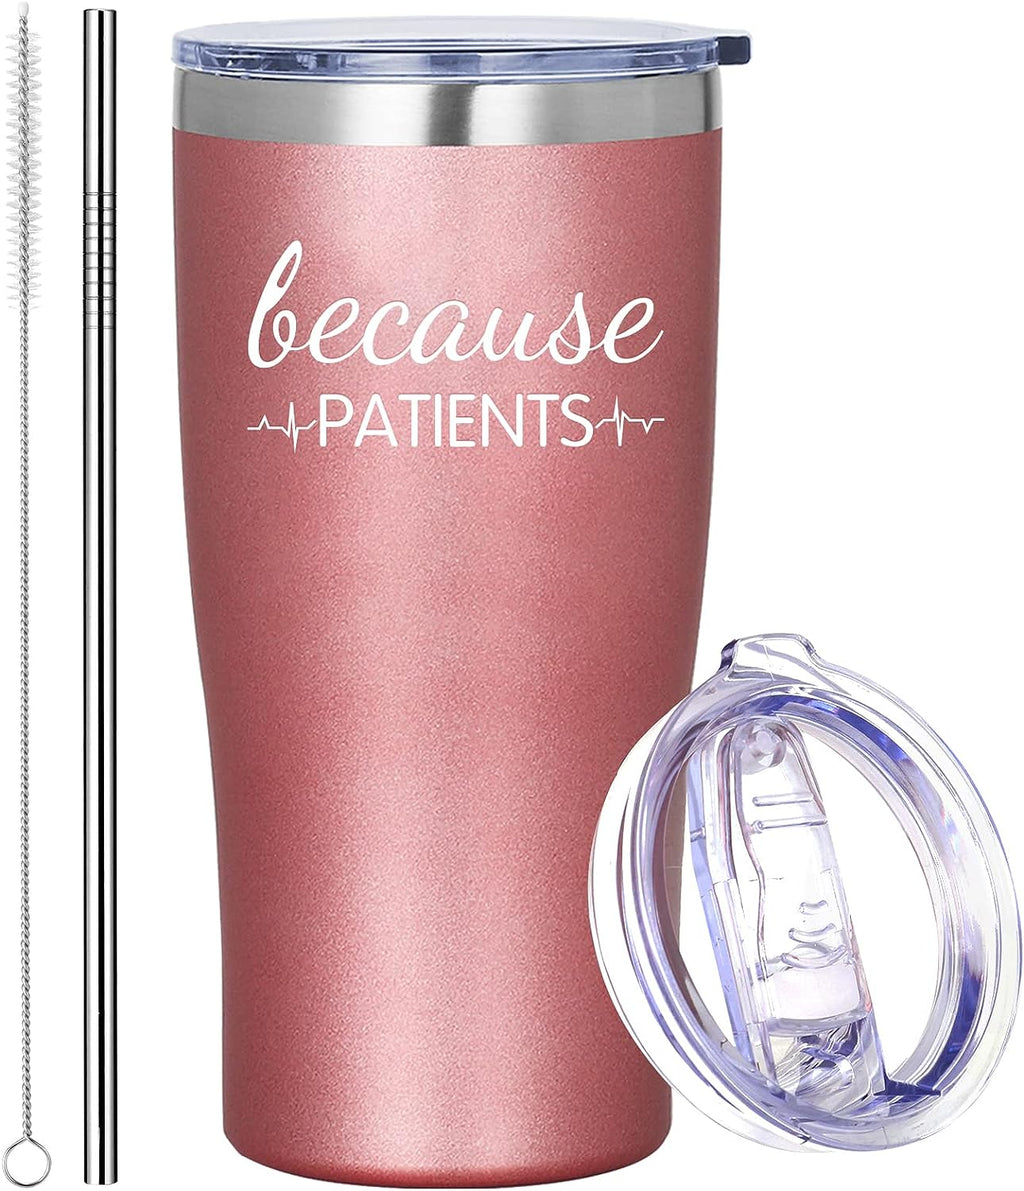 Nurse Practitioner Gifts for Women Because Patients 20Oz Personalized Tumbler Cup Mug,Rn Gifts for Nurses,Dentist,Lpn,Medical,Hygienist,Doctor,Urology,Physician,Graduation-Rosegold